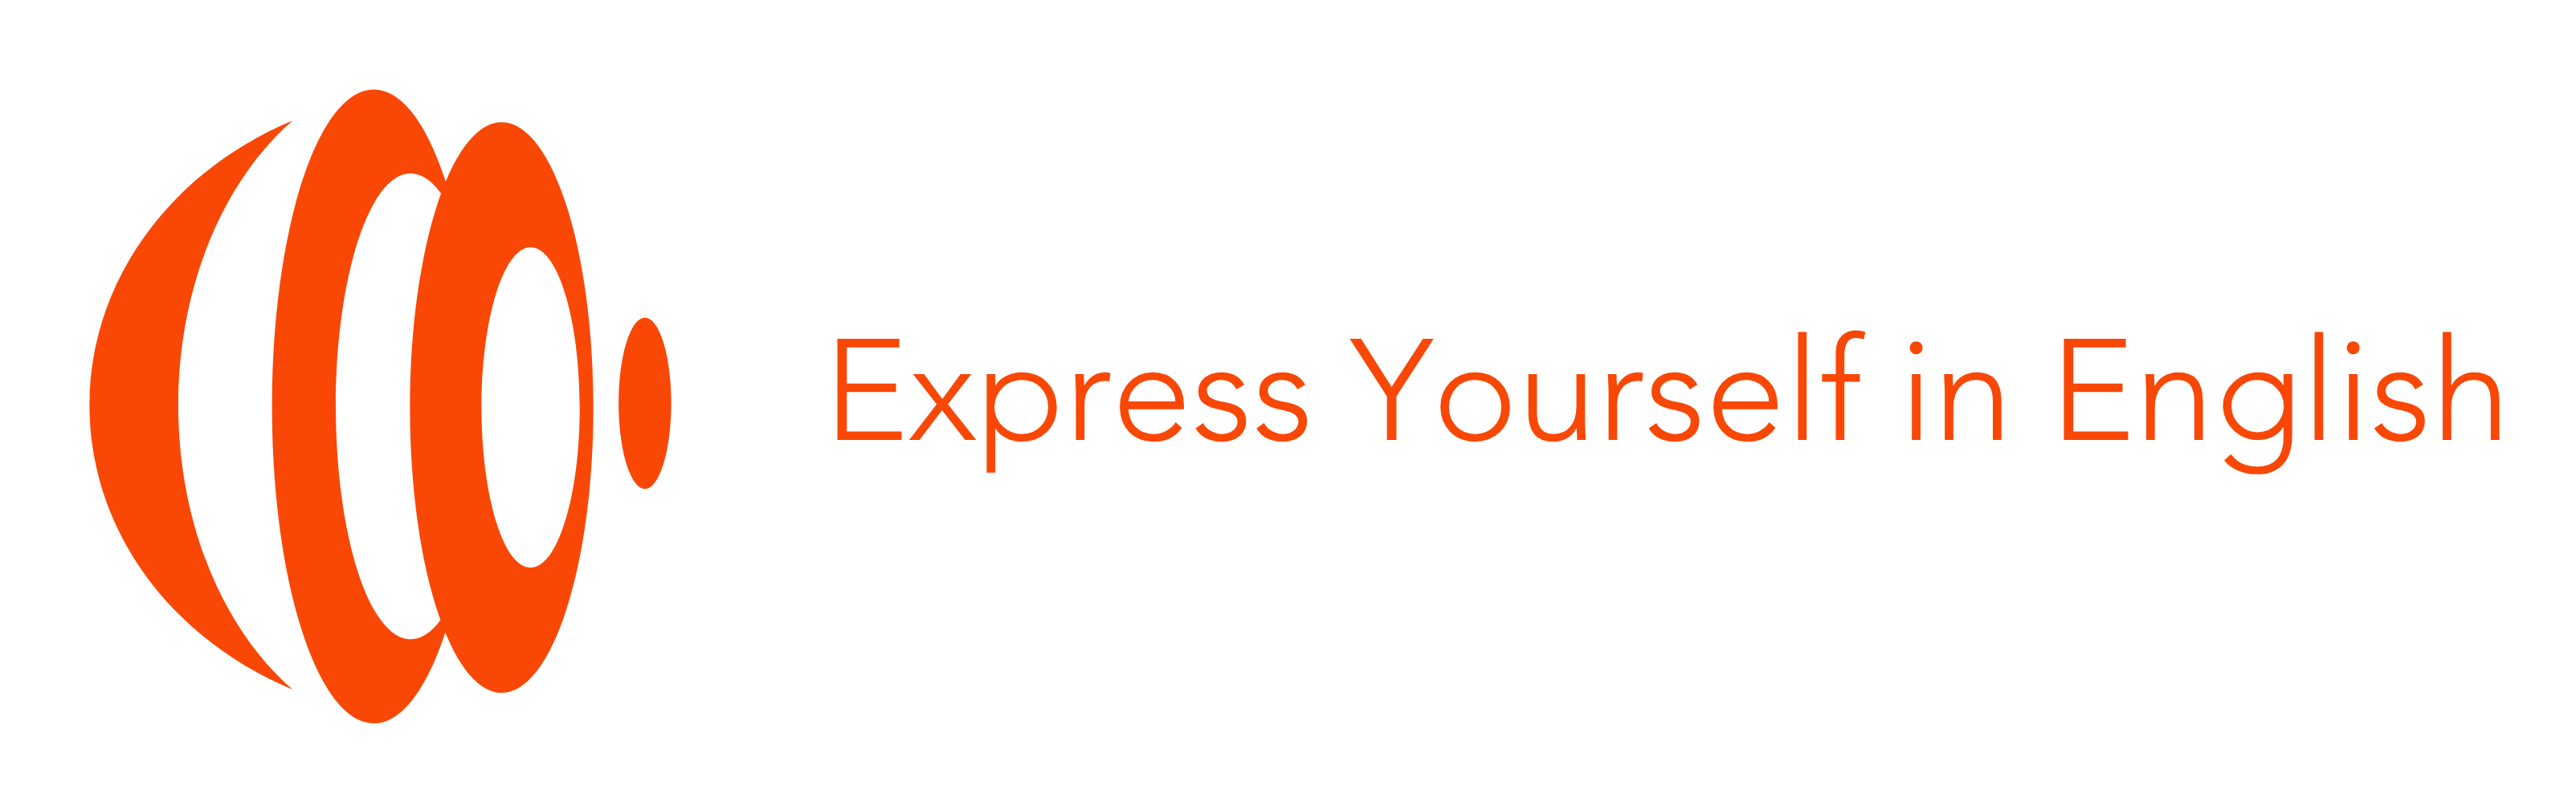 Express Yourself in English